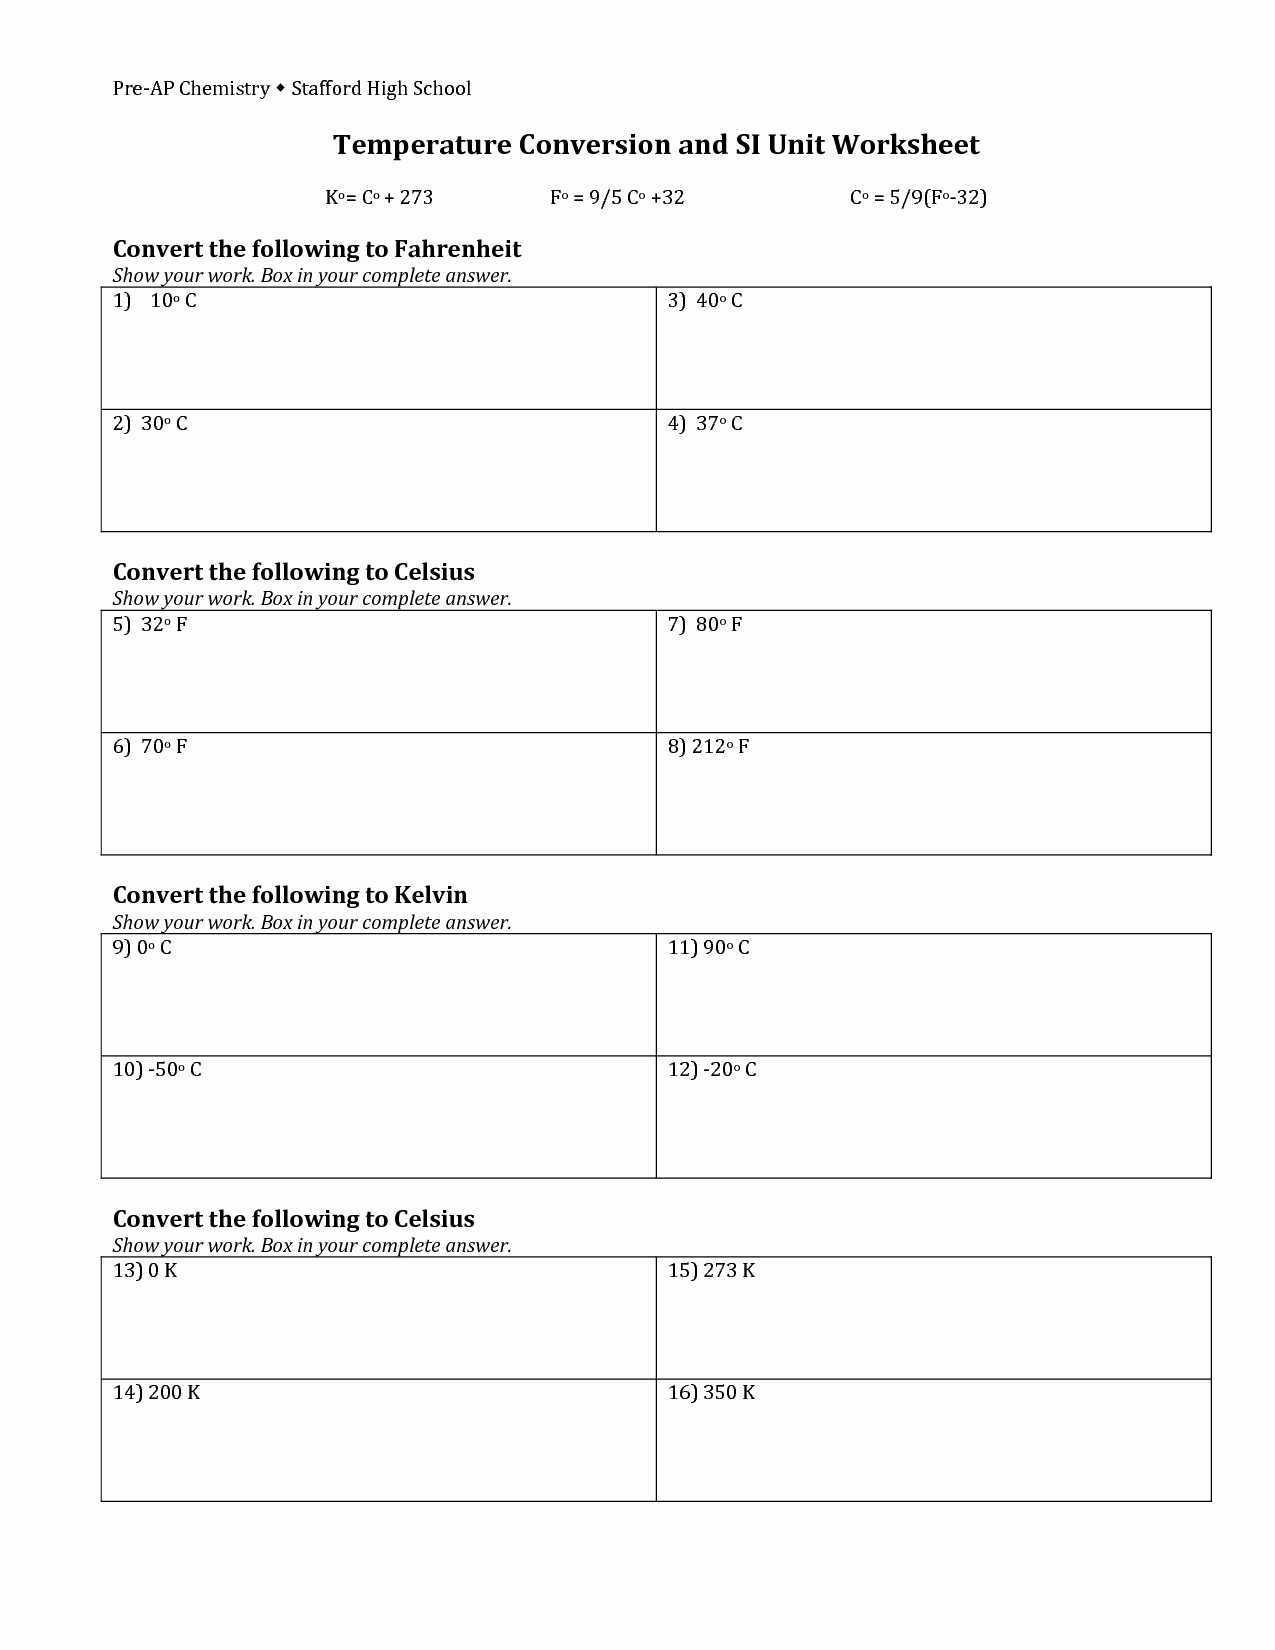 Temperature Conversion Worksheet Answers Inspirational 13 Best Of Kelvin Temperature Conversion Worksheet